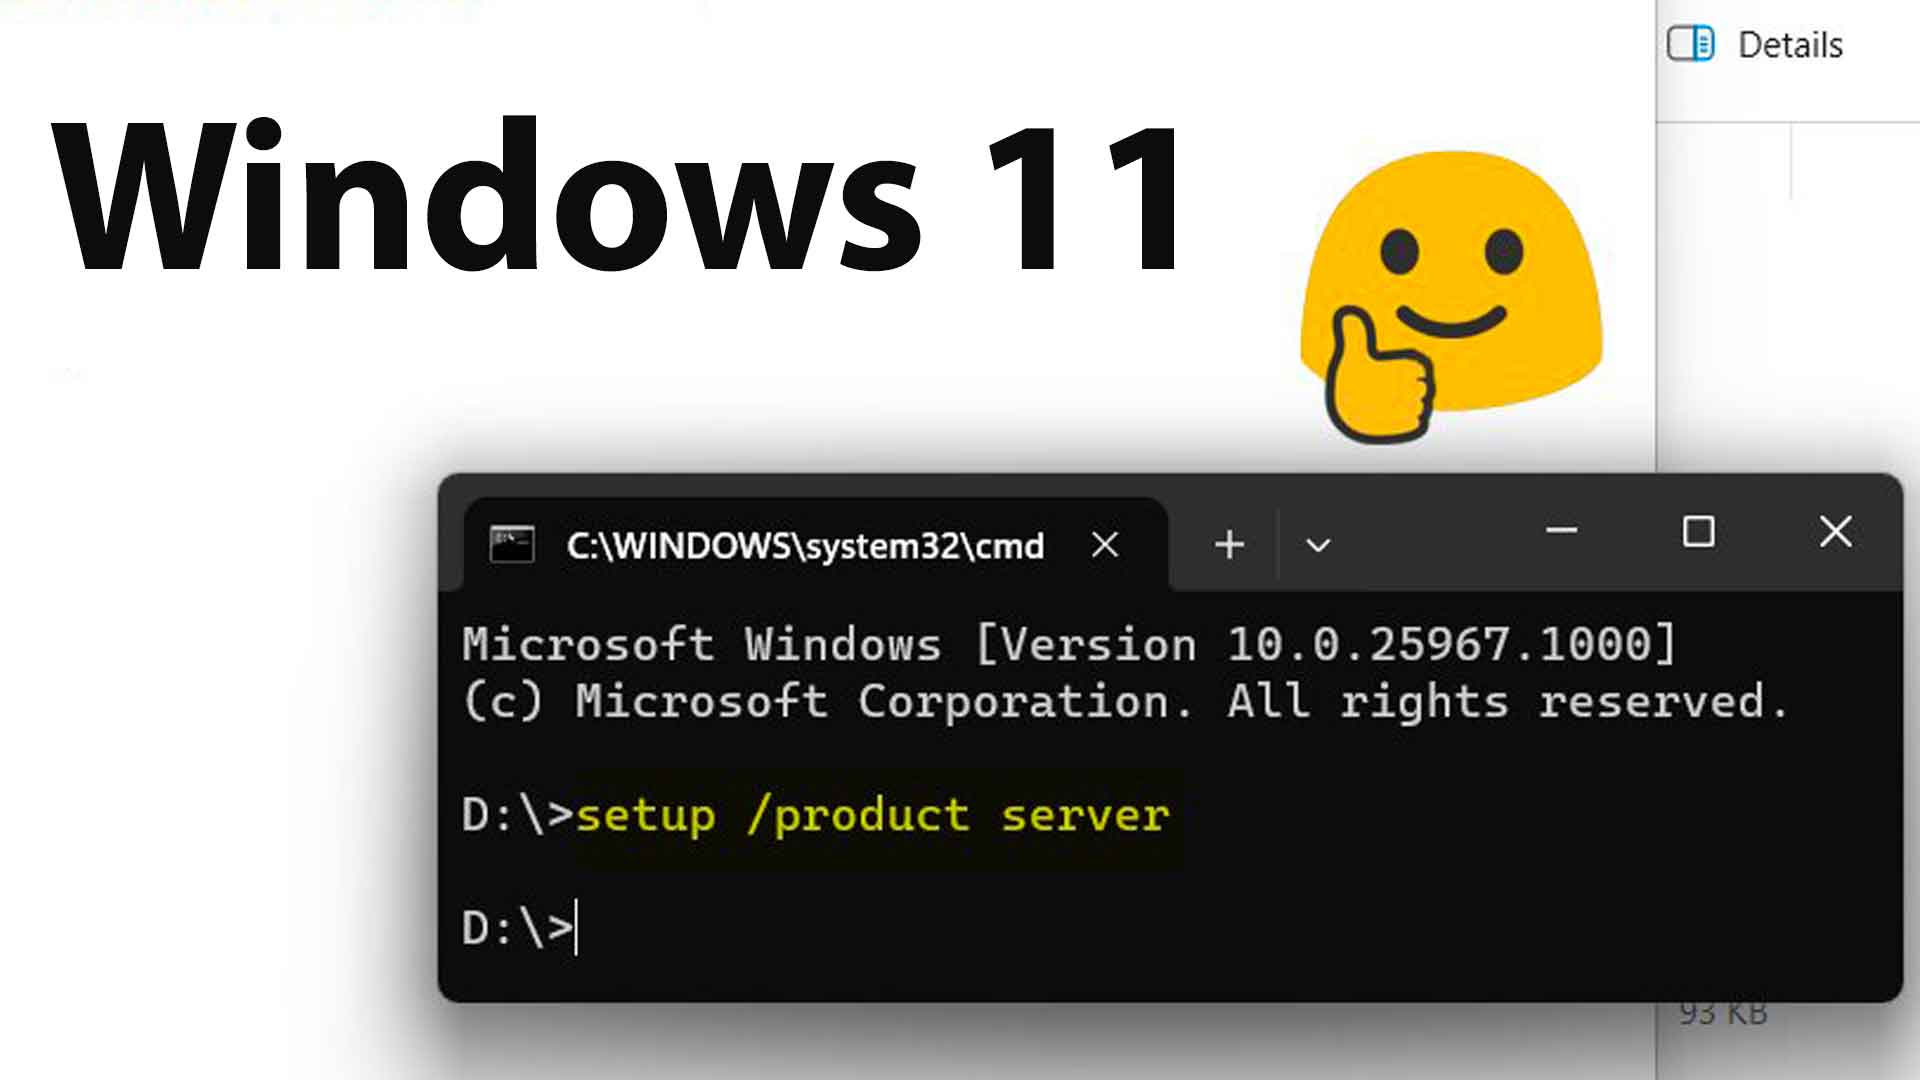 Unleash Windows 11: A simple command to bypass its hardware requirements?